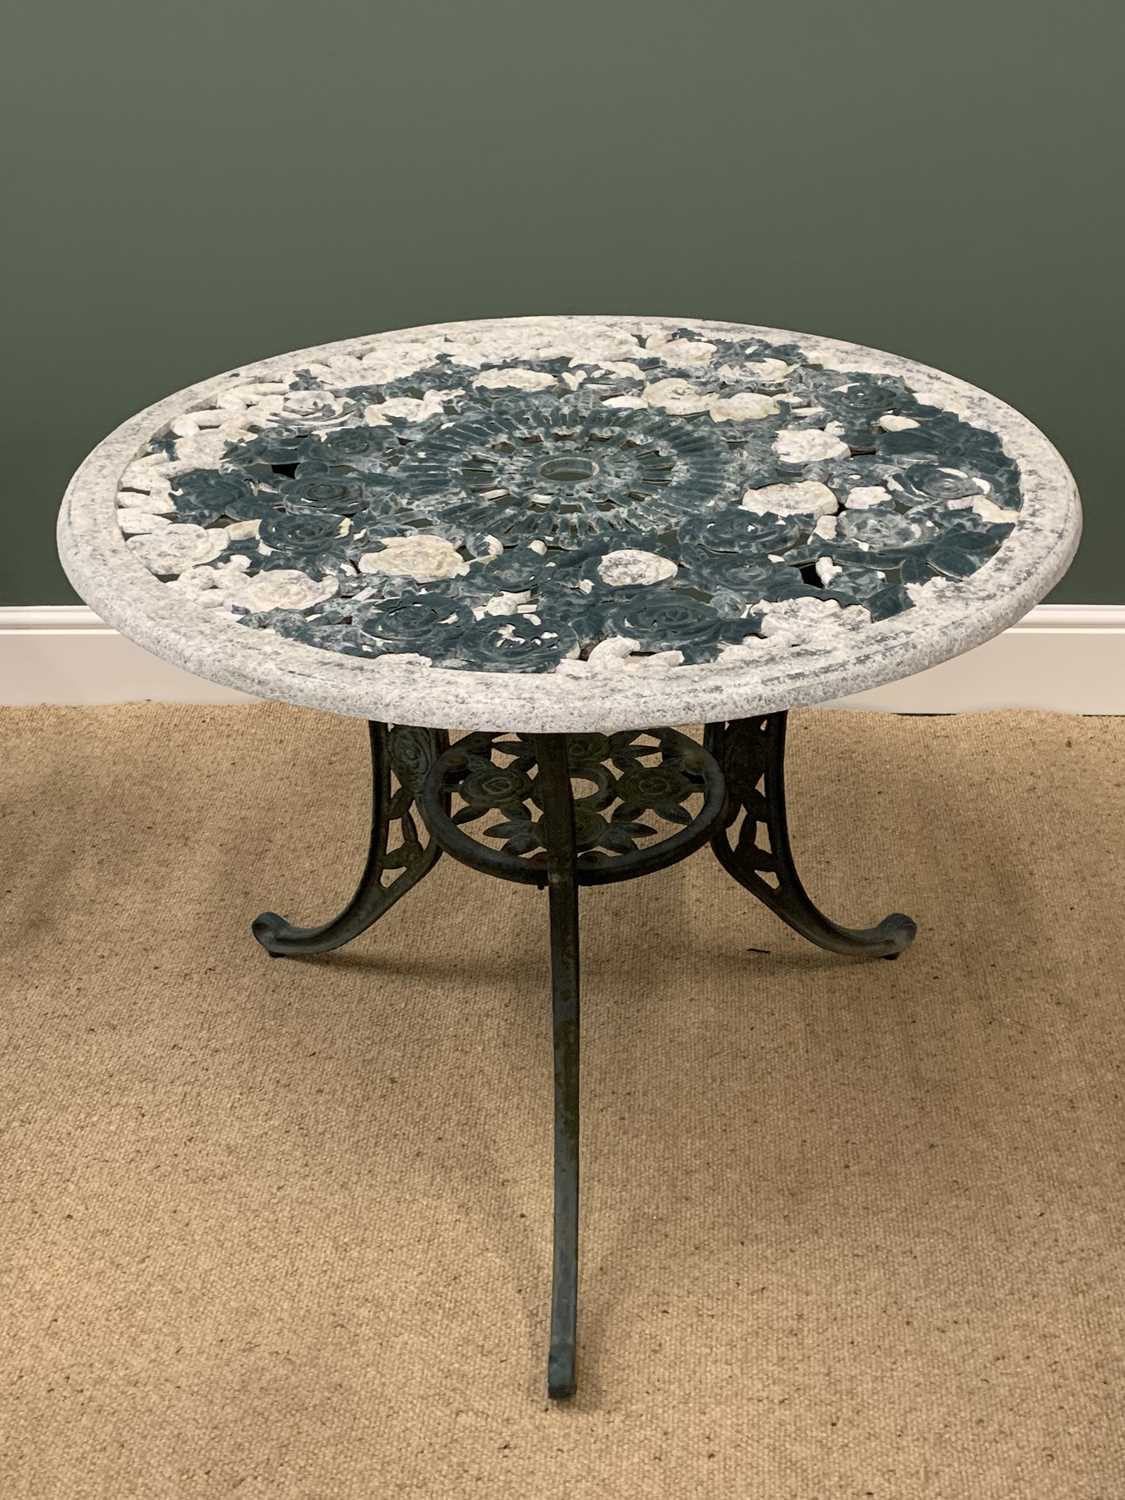 GARDEN FURNITURE - cast metal circular topped table, 90cms diameter, four carver chairs and a - Image 2 of 4